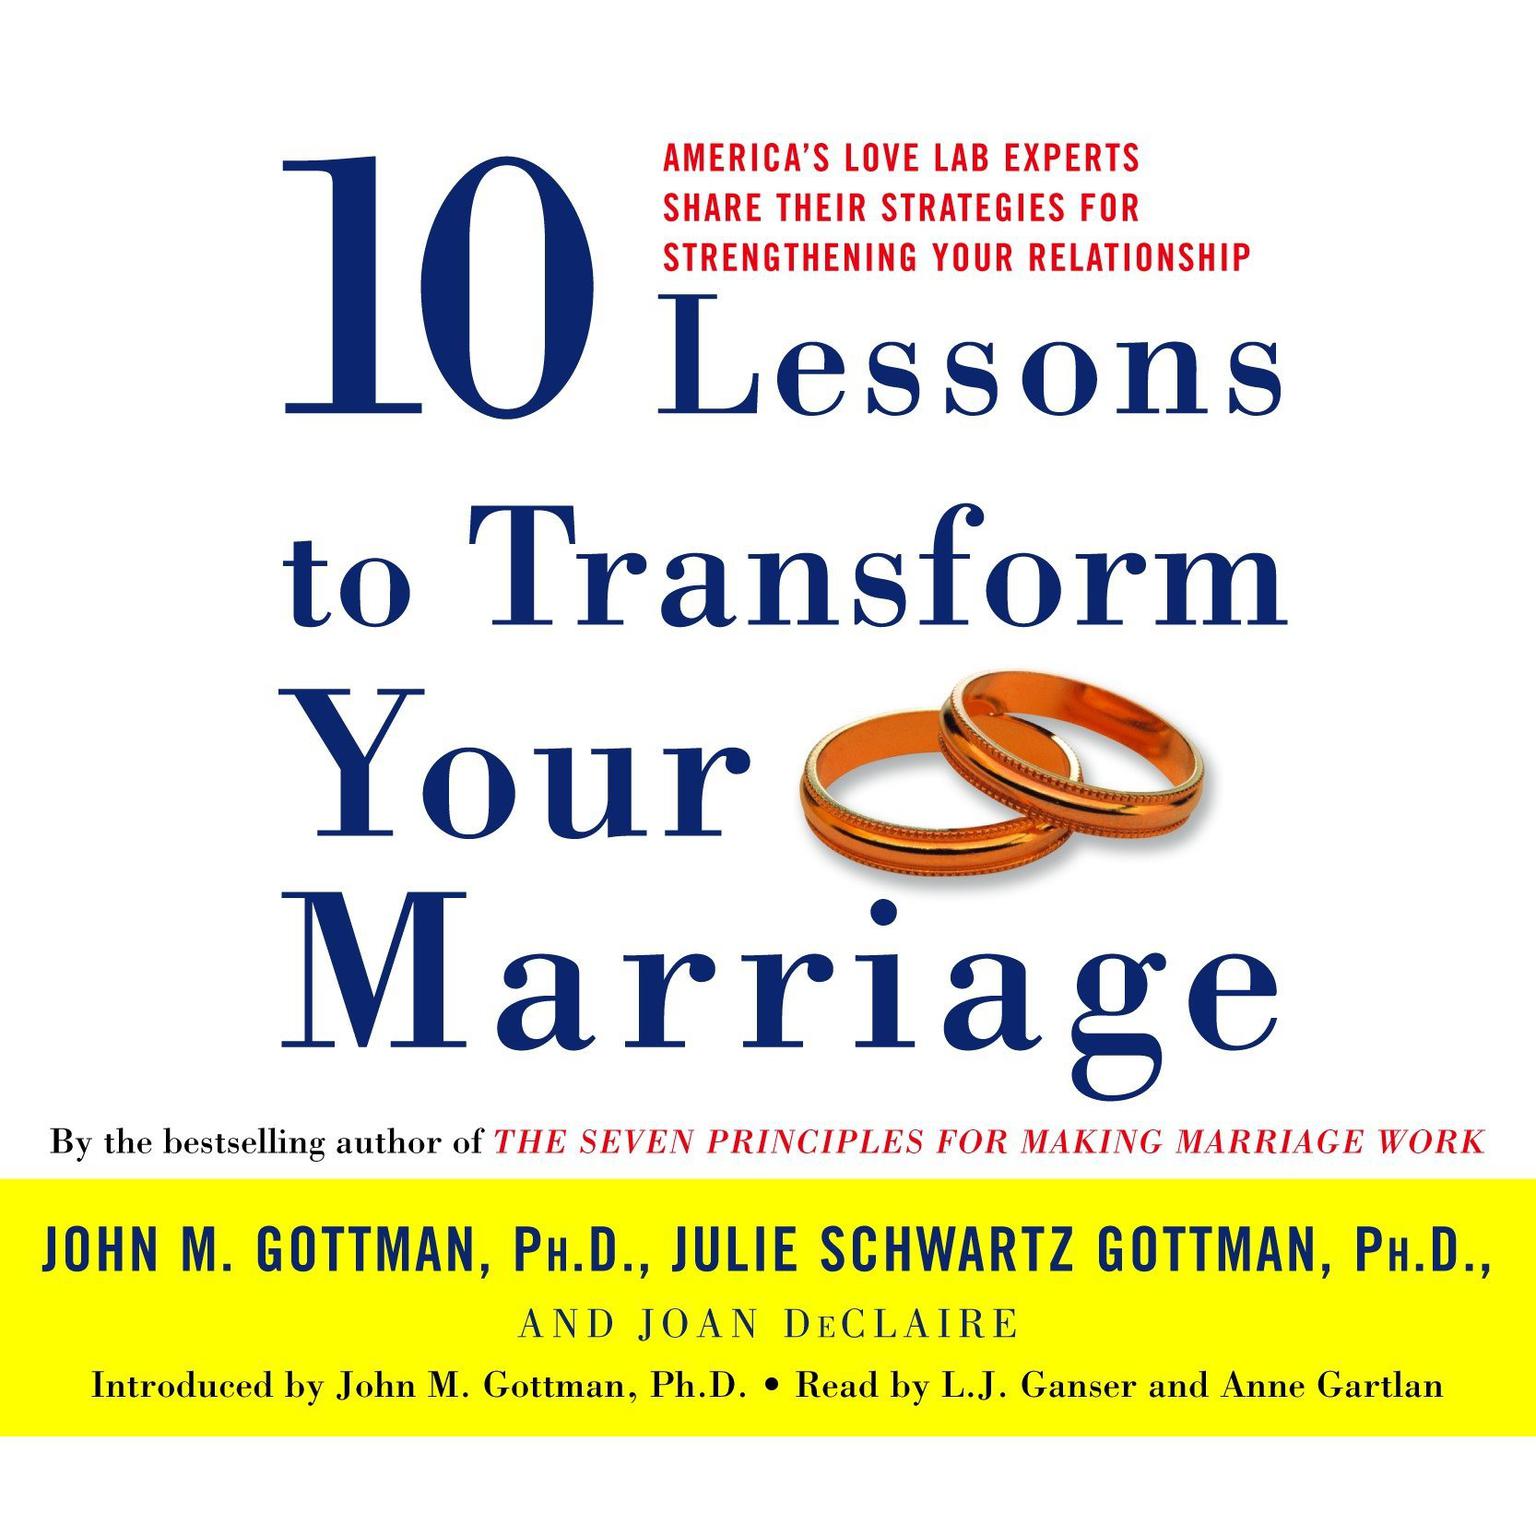 Ten Lessons to Transform Your Marriage (Abridged): Americas Love Lab Experts Share Their Strategies for Strengthening Your Relationship Audiobook, by John Gottman